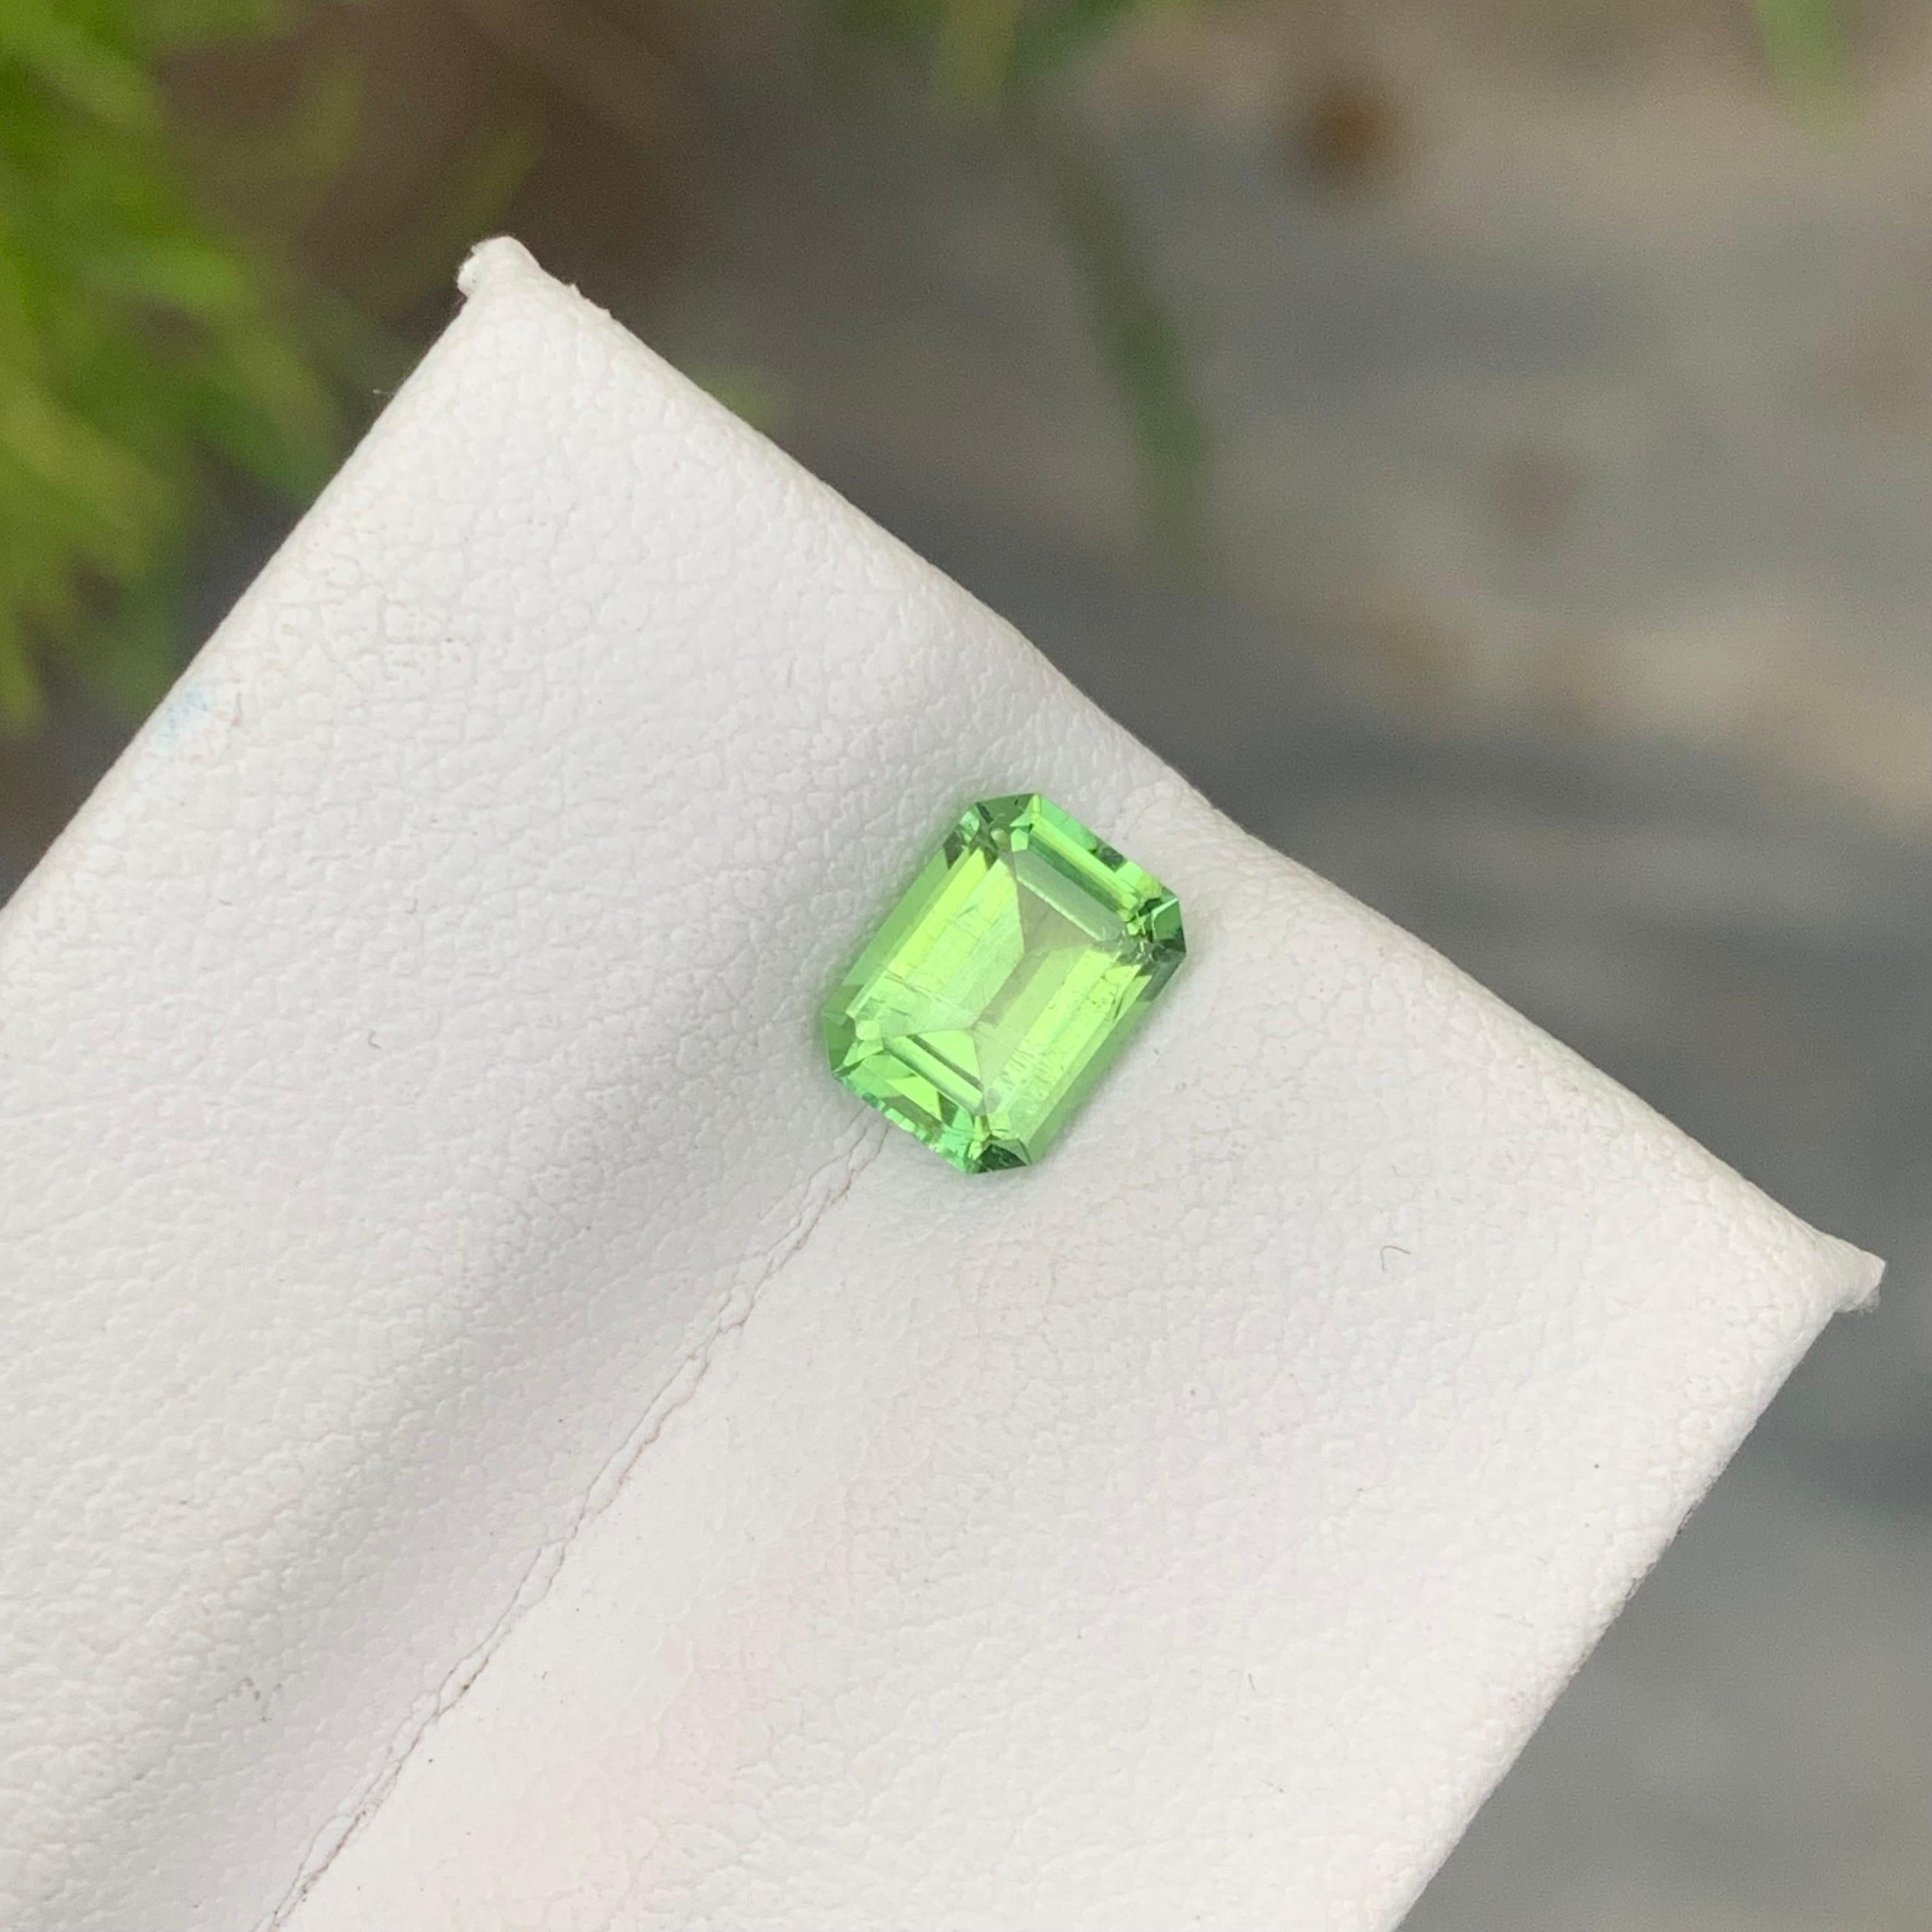 0.95 Carat Natural Loose Green Afghani Tourmaline Emerald Cut Gemstone for Ring For Sale 3